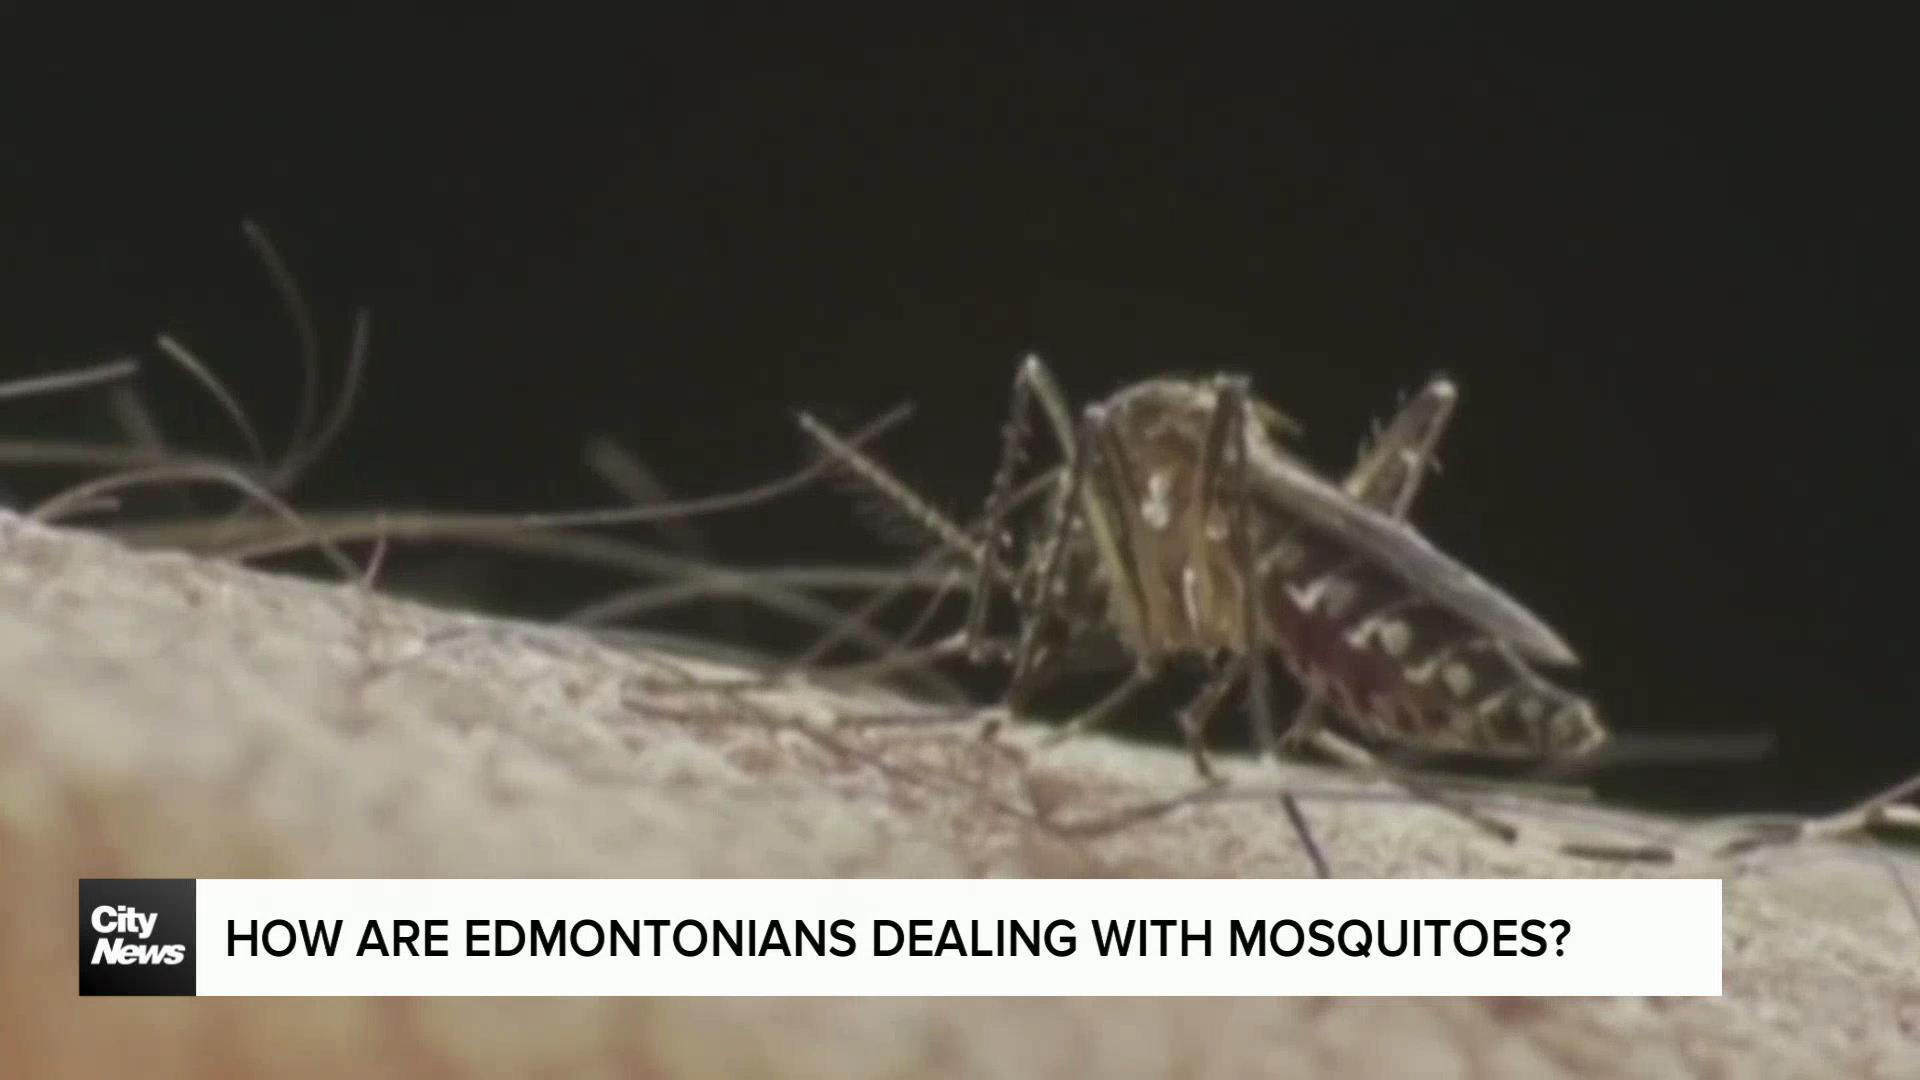 How are Edmontonians dealing with mosquitoes?